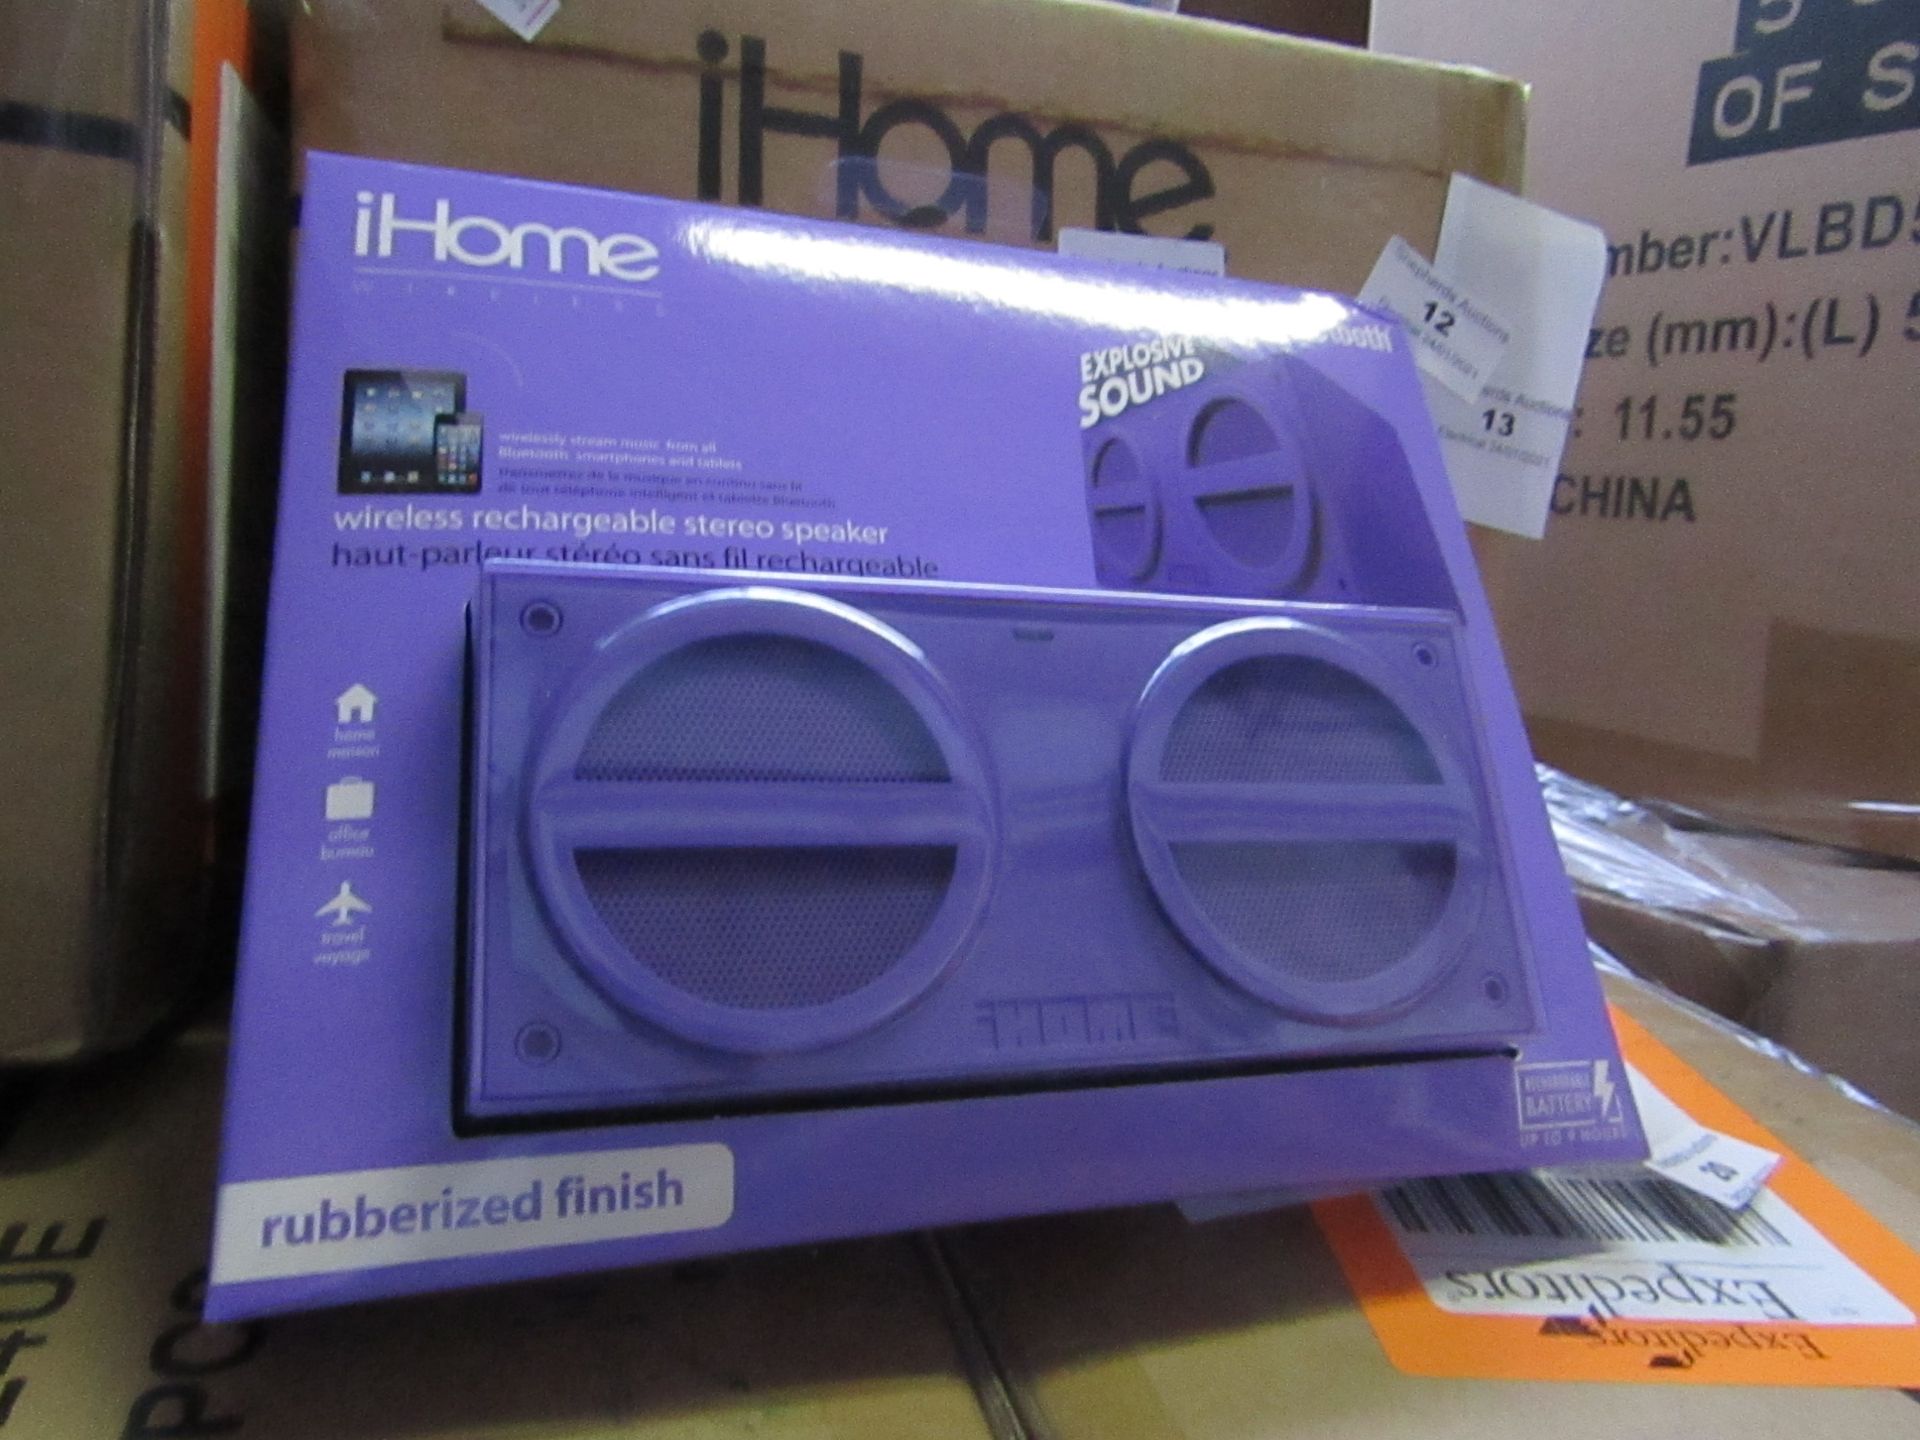 4x iHome, Wireless Rechargeable Stereo Speaker, New and Boxed